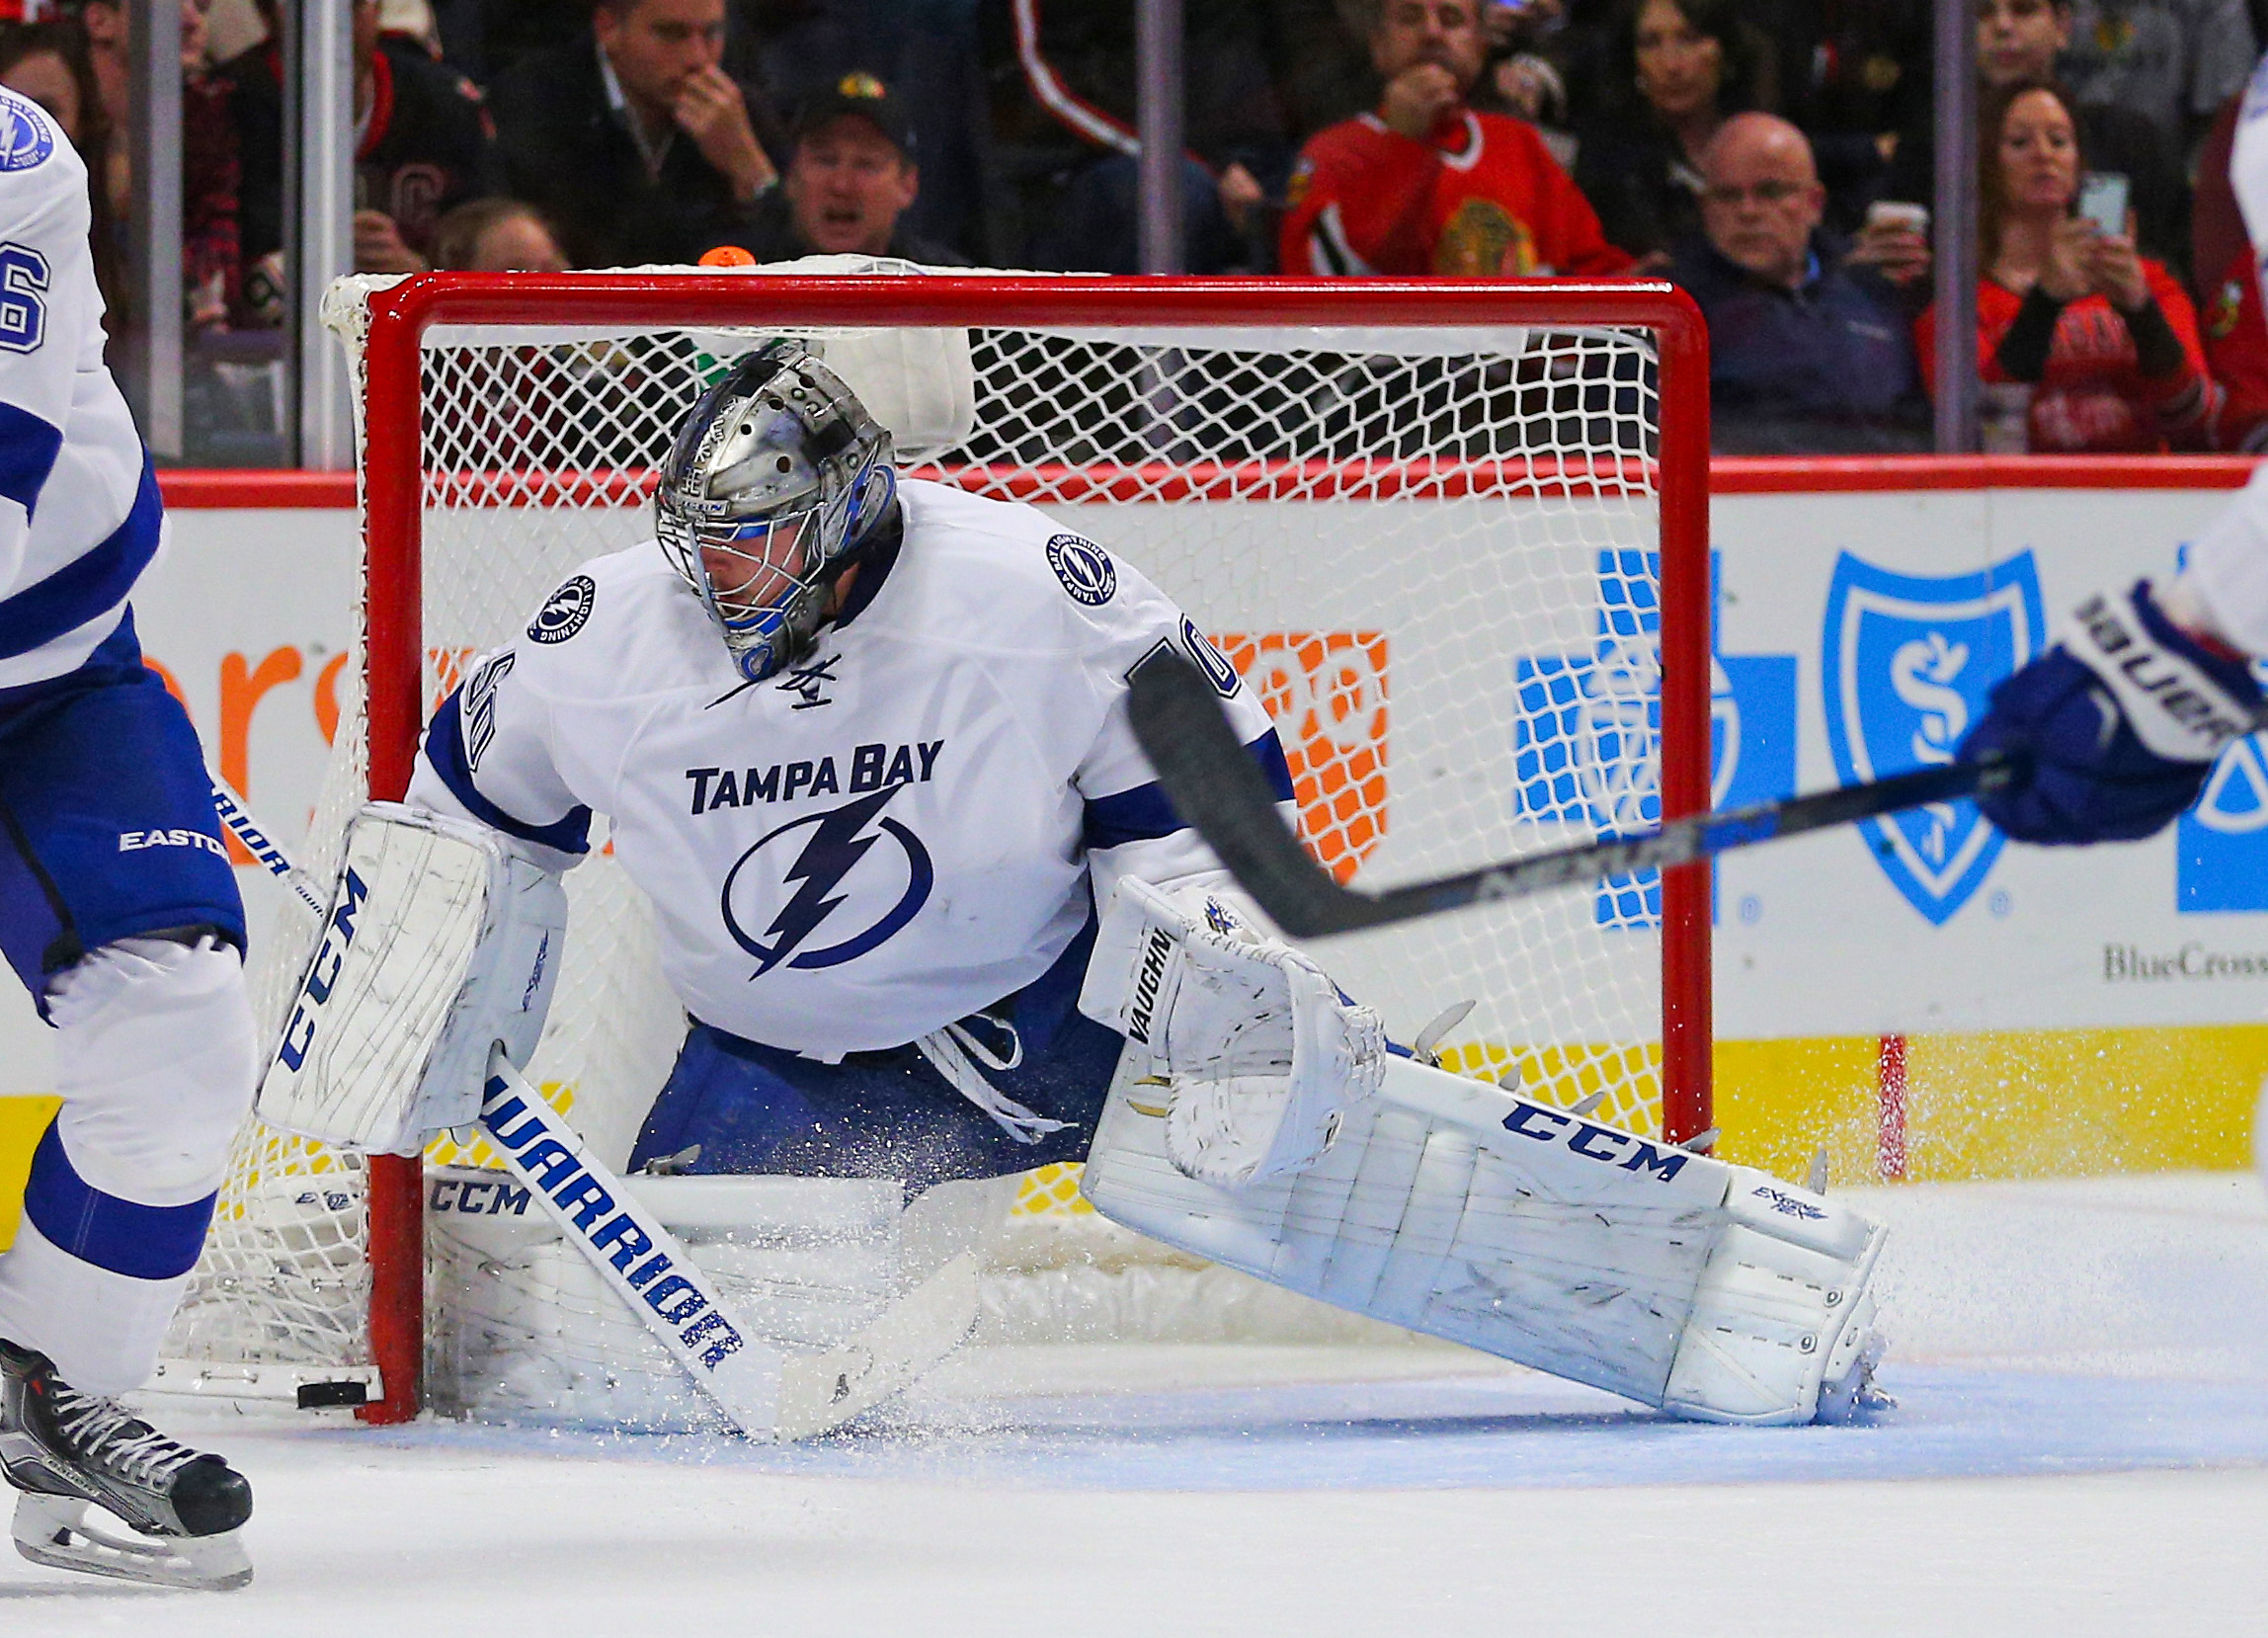 Tampa Bay Lightning Goaltender Kristers Gudlevskis looks for a loose puck in a game against the Chicago Blackhawks.